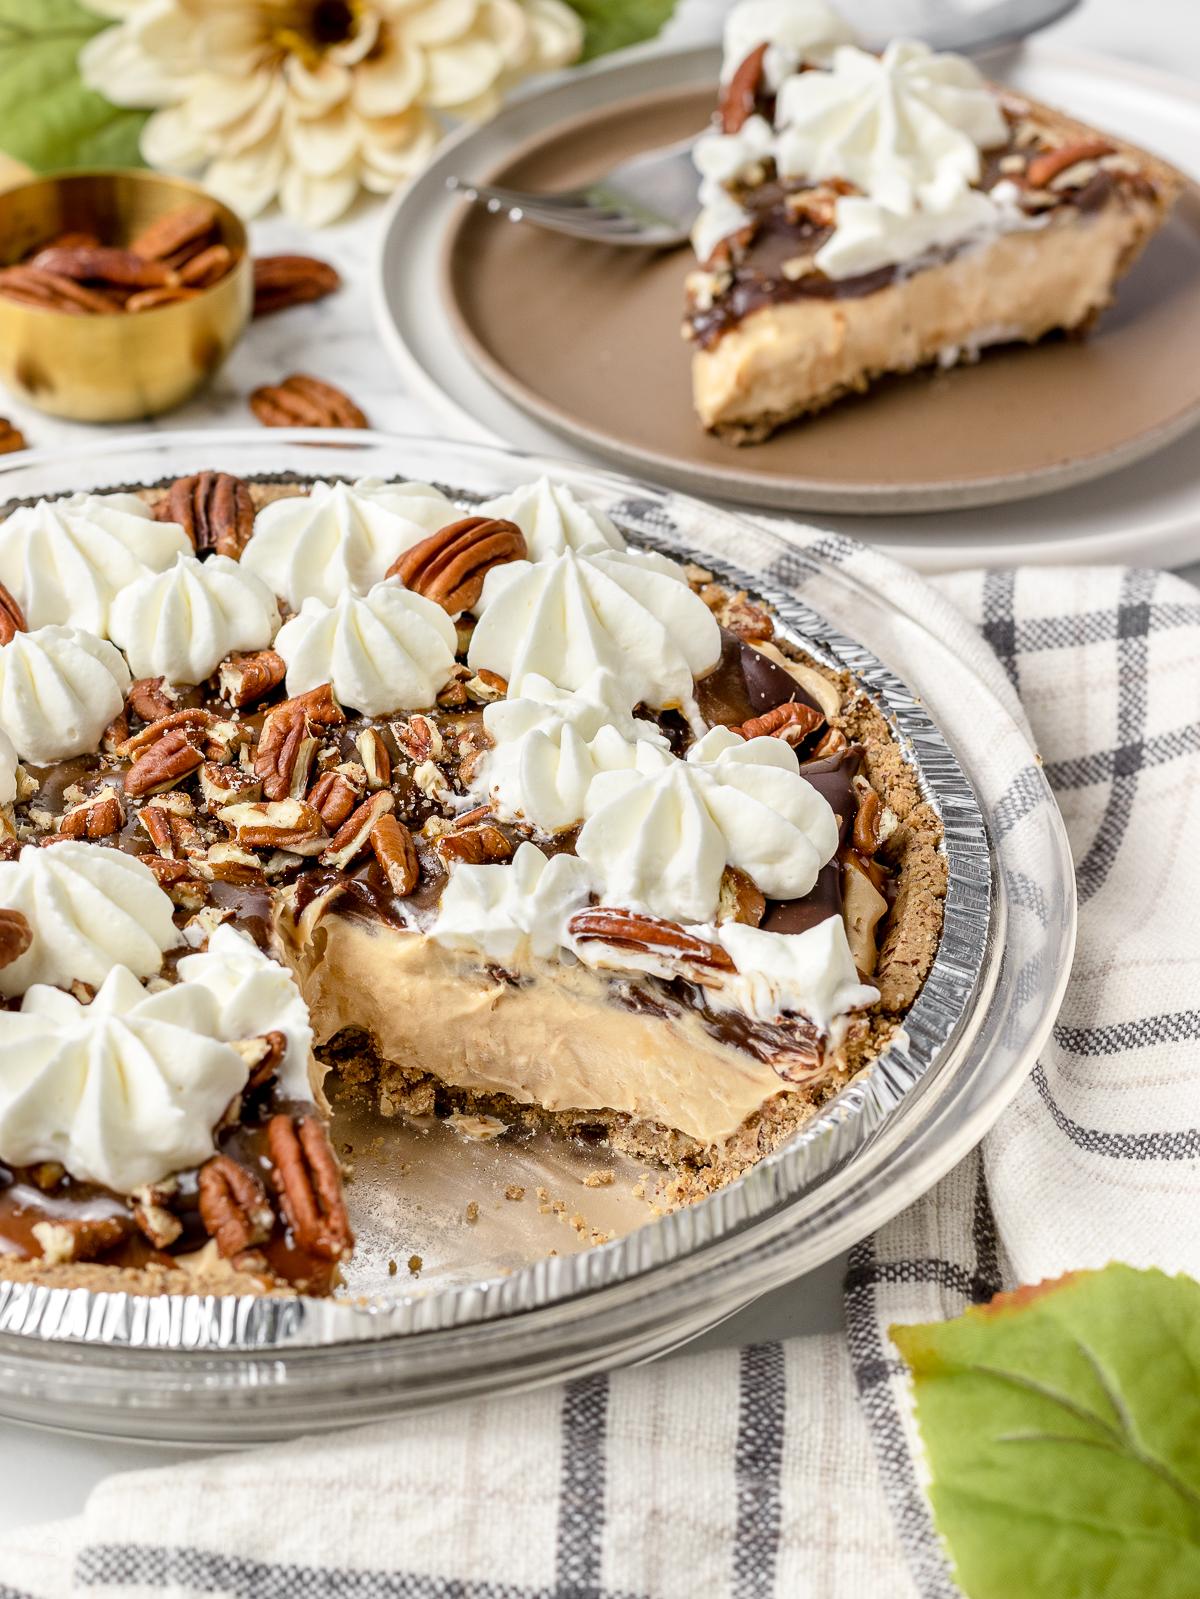 No bake turtle pie with one slice removed and on a plate in the background ready to eat.